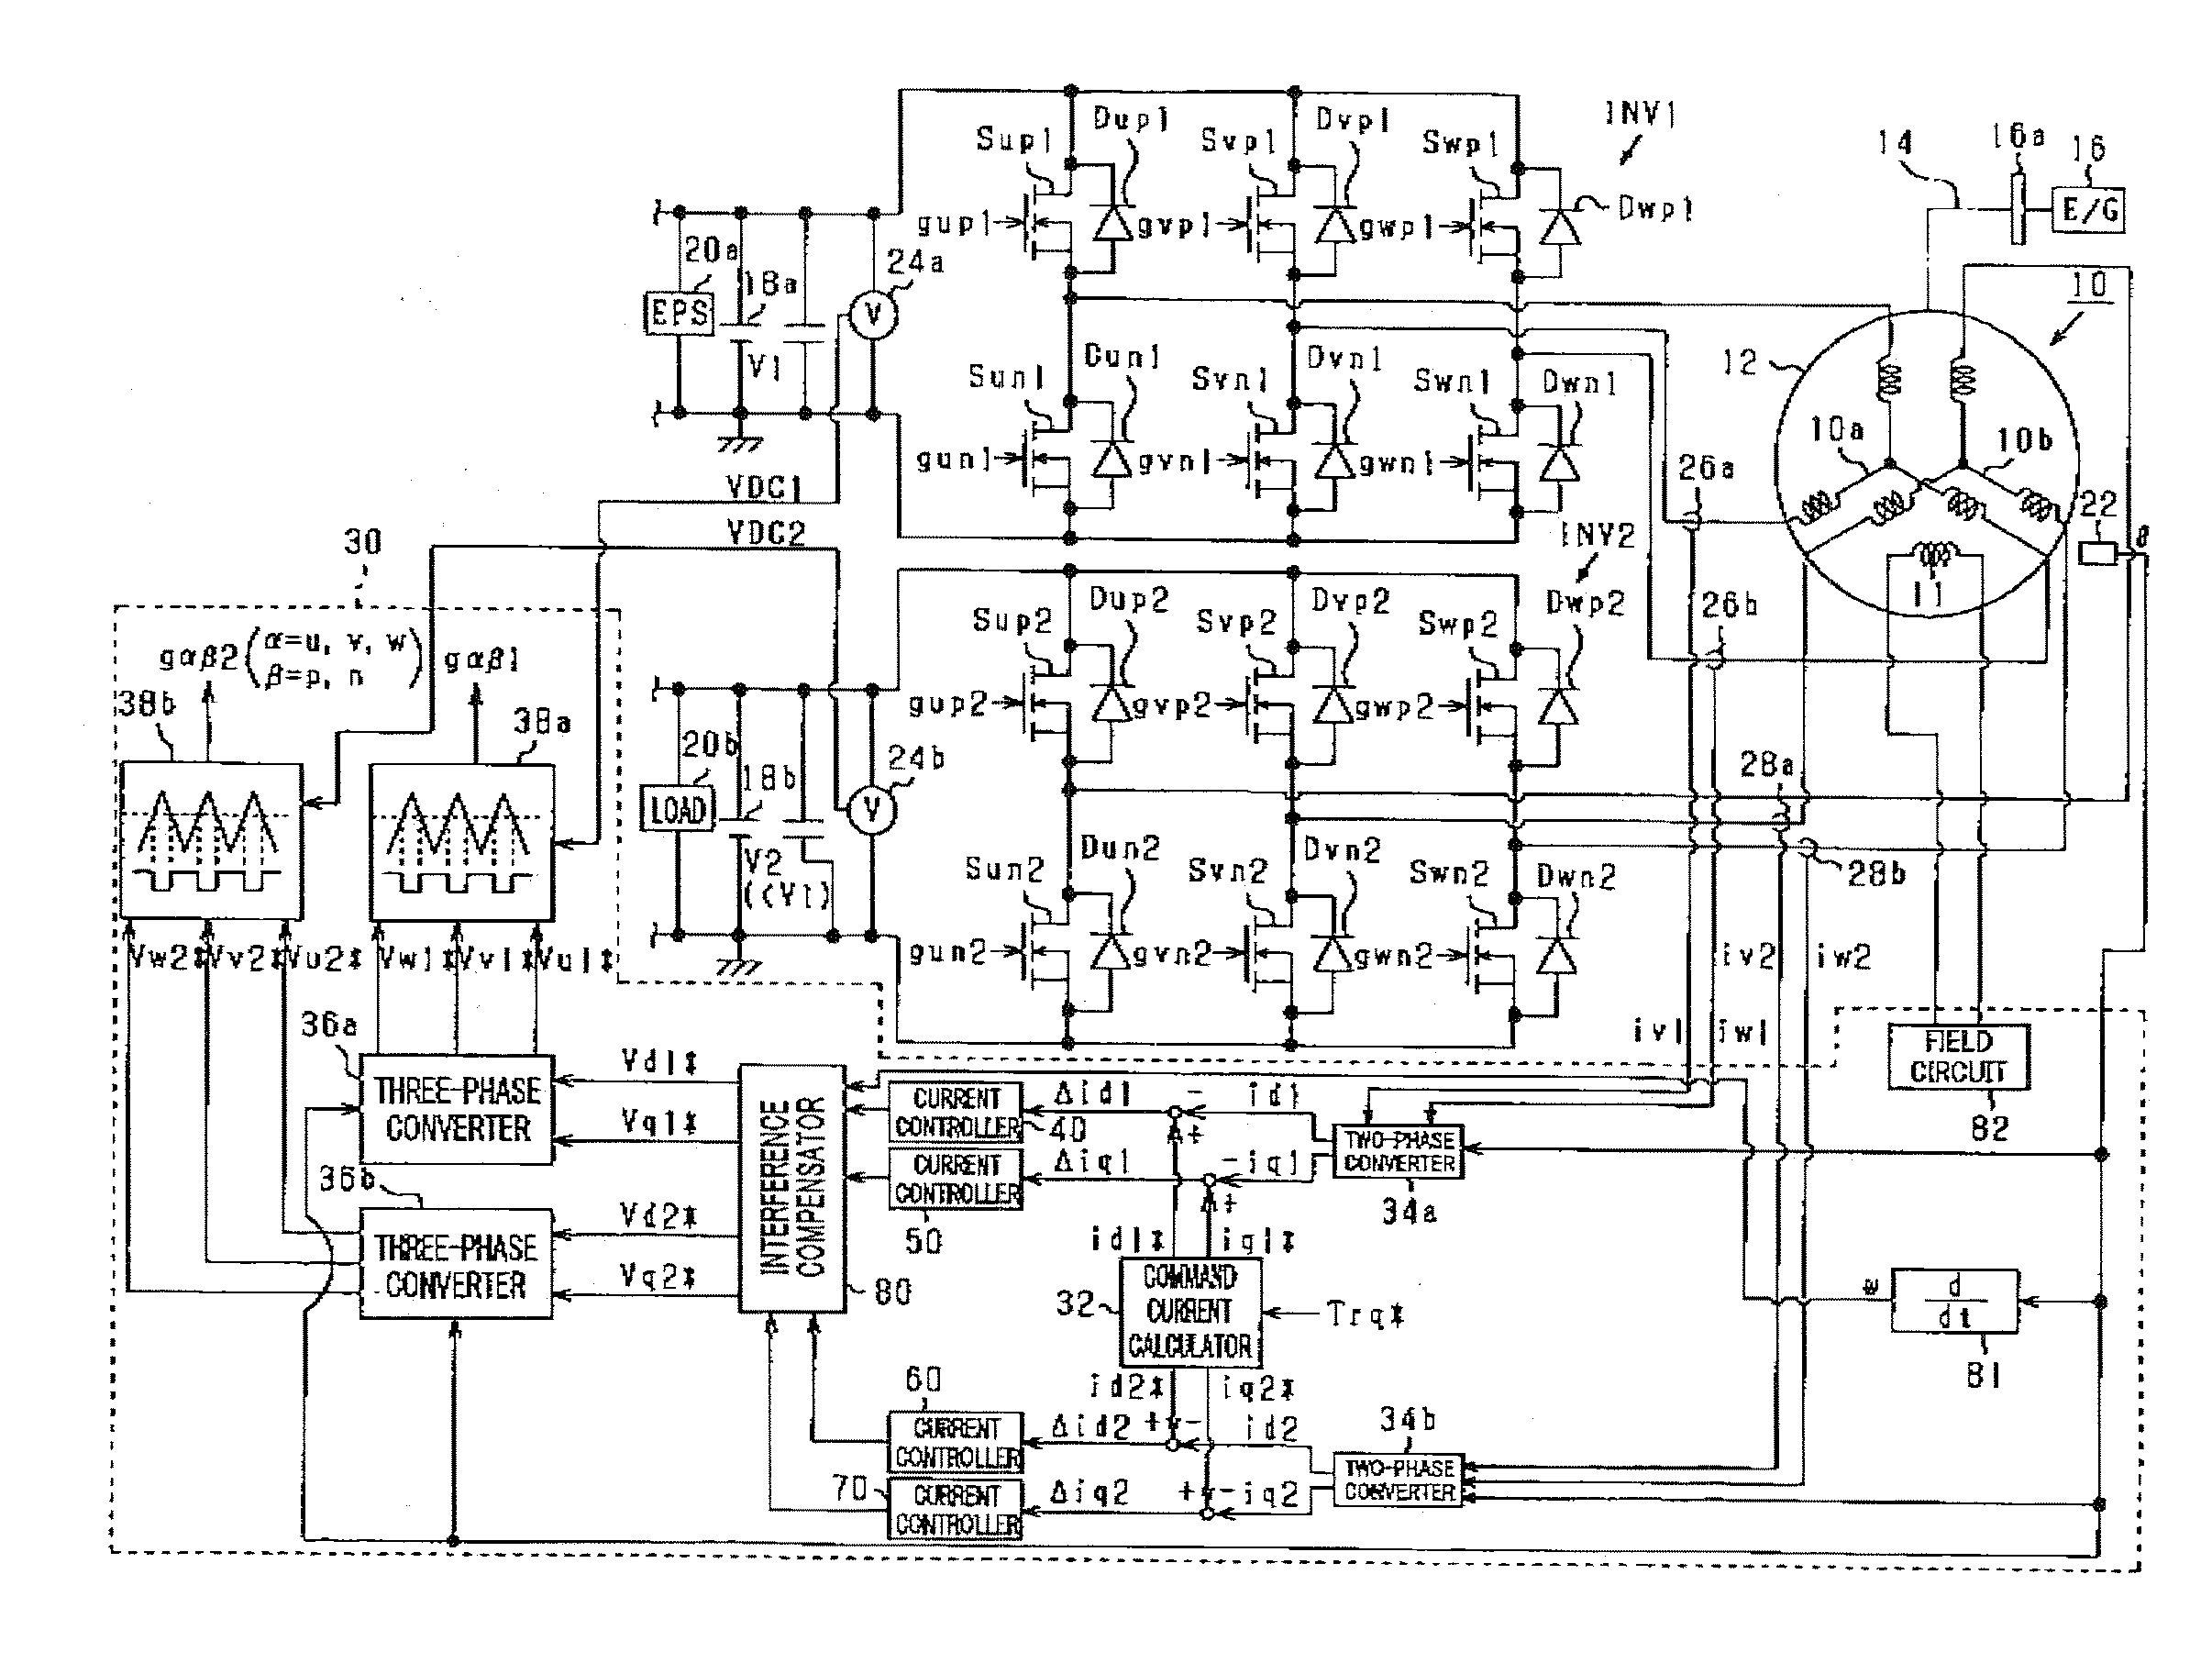 Apparatus for controlling a multi-winding rotary machine